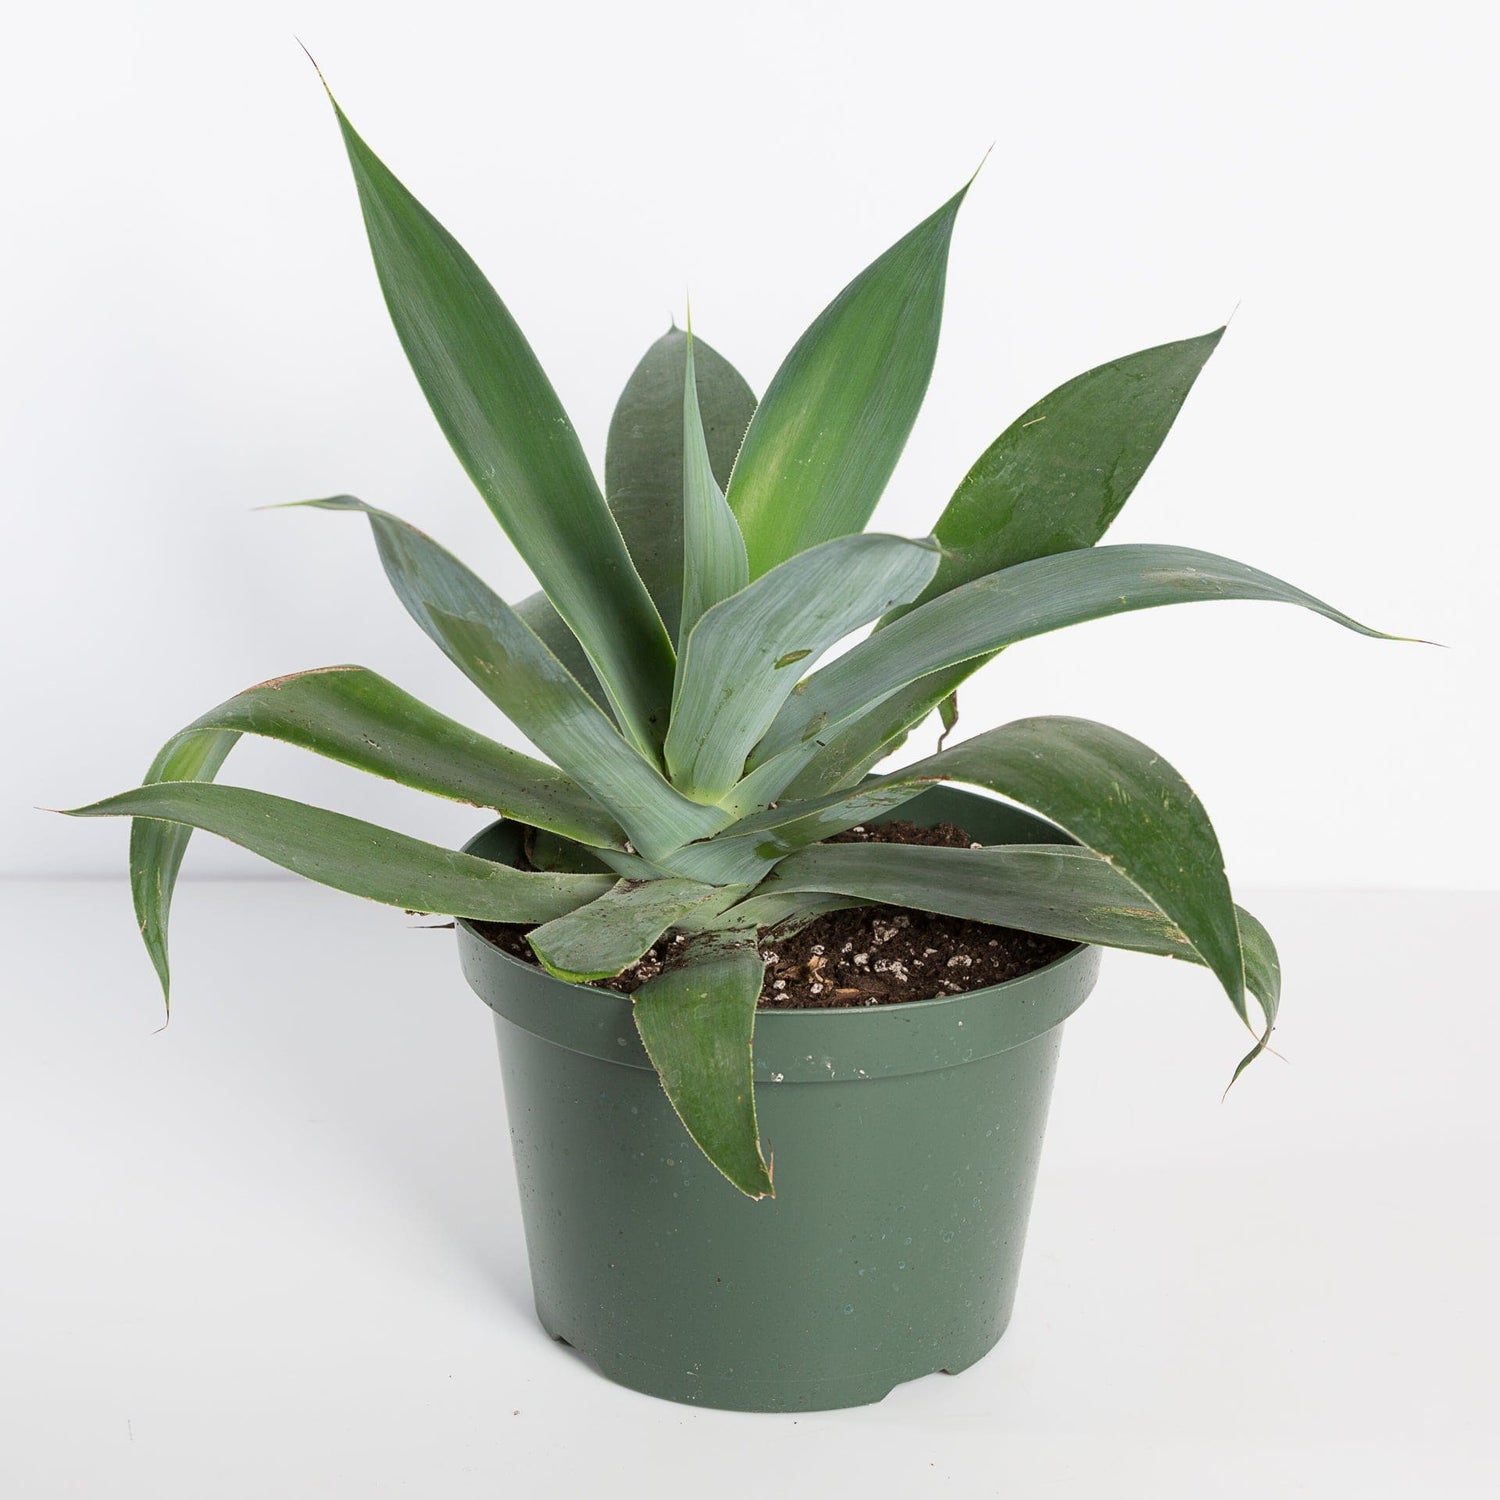 Urban Sprouts Plant 8" in nursery pot Agave "Blue"